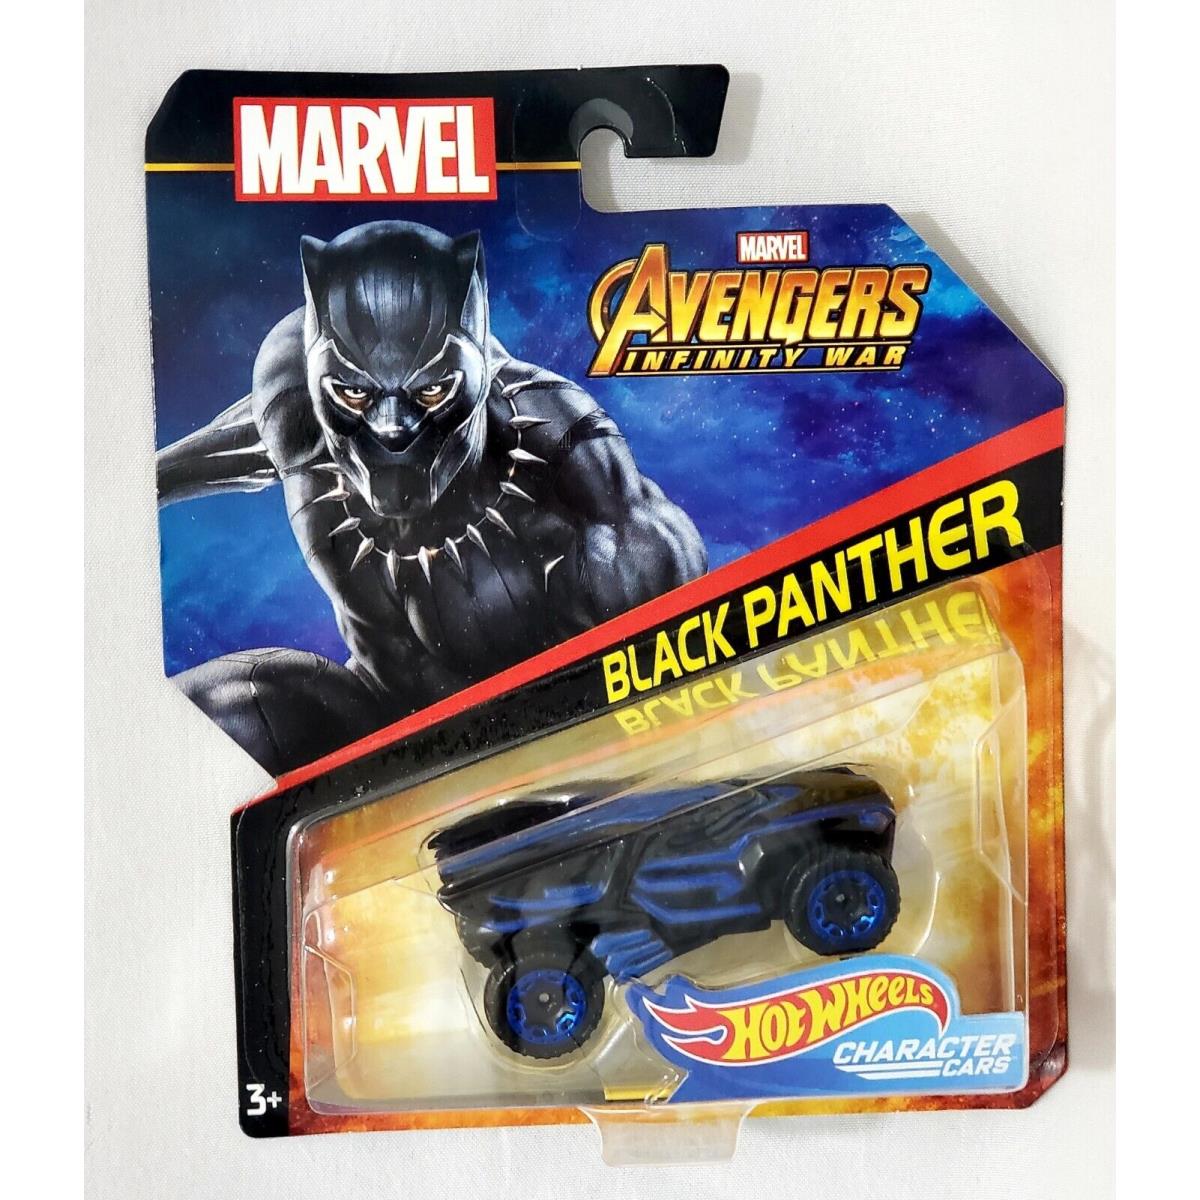 2017 Hot Wheels Character Cars - Black Panther 1:64 Marvel Avengers Infinity War